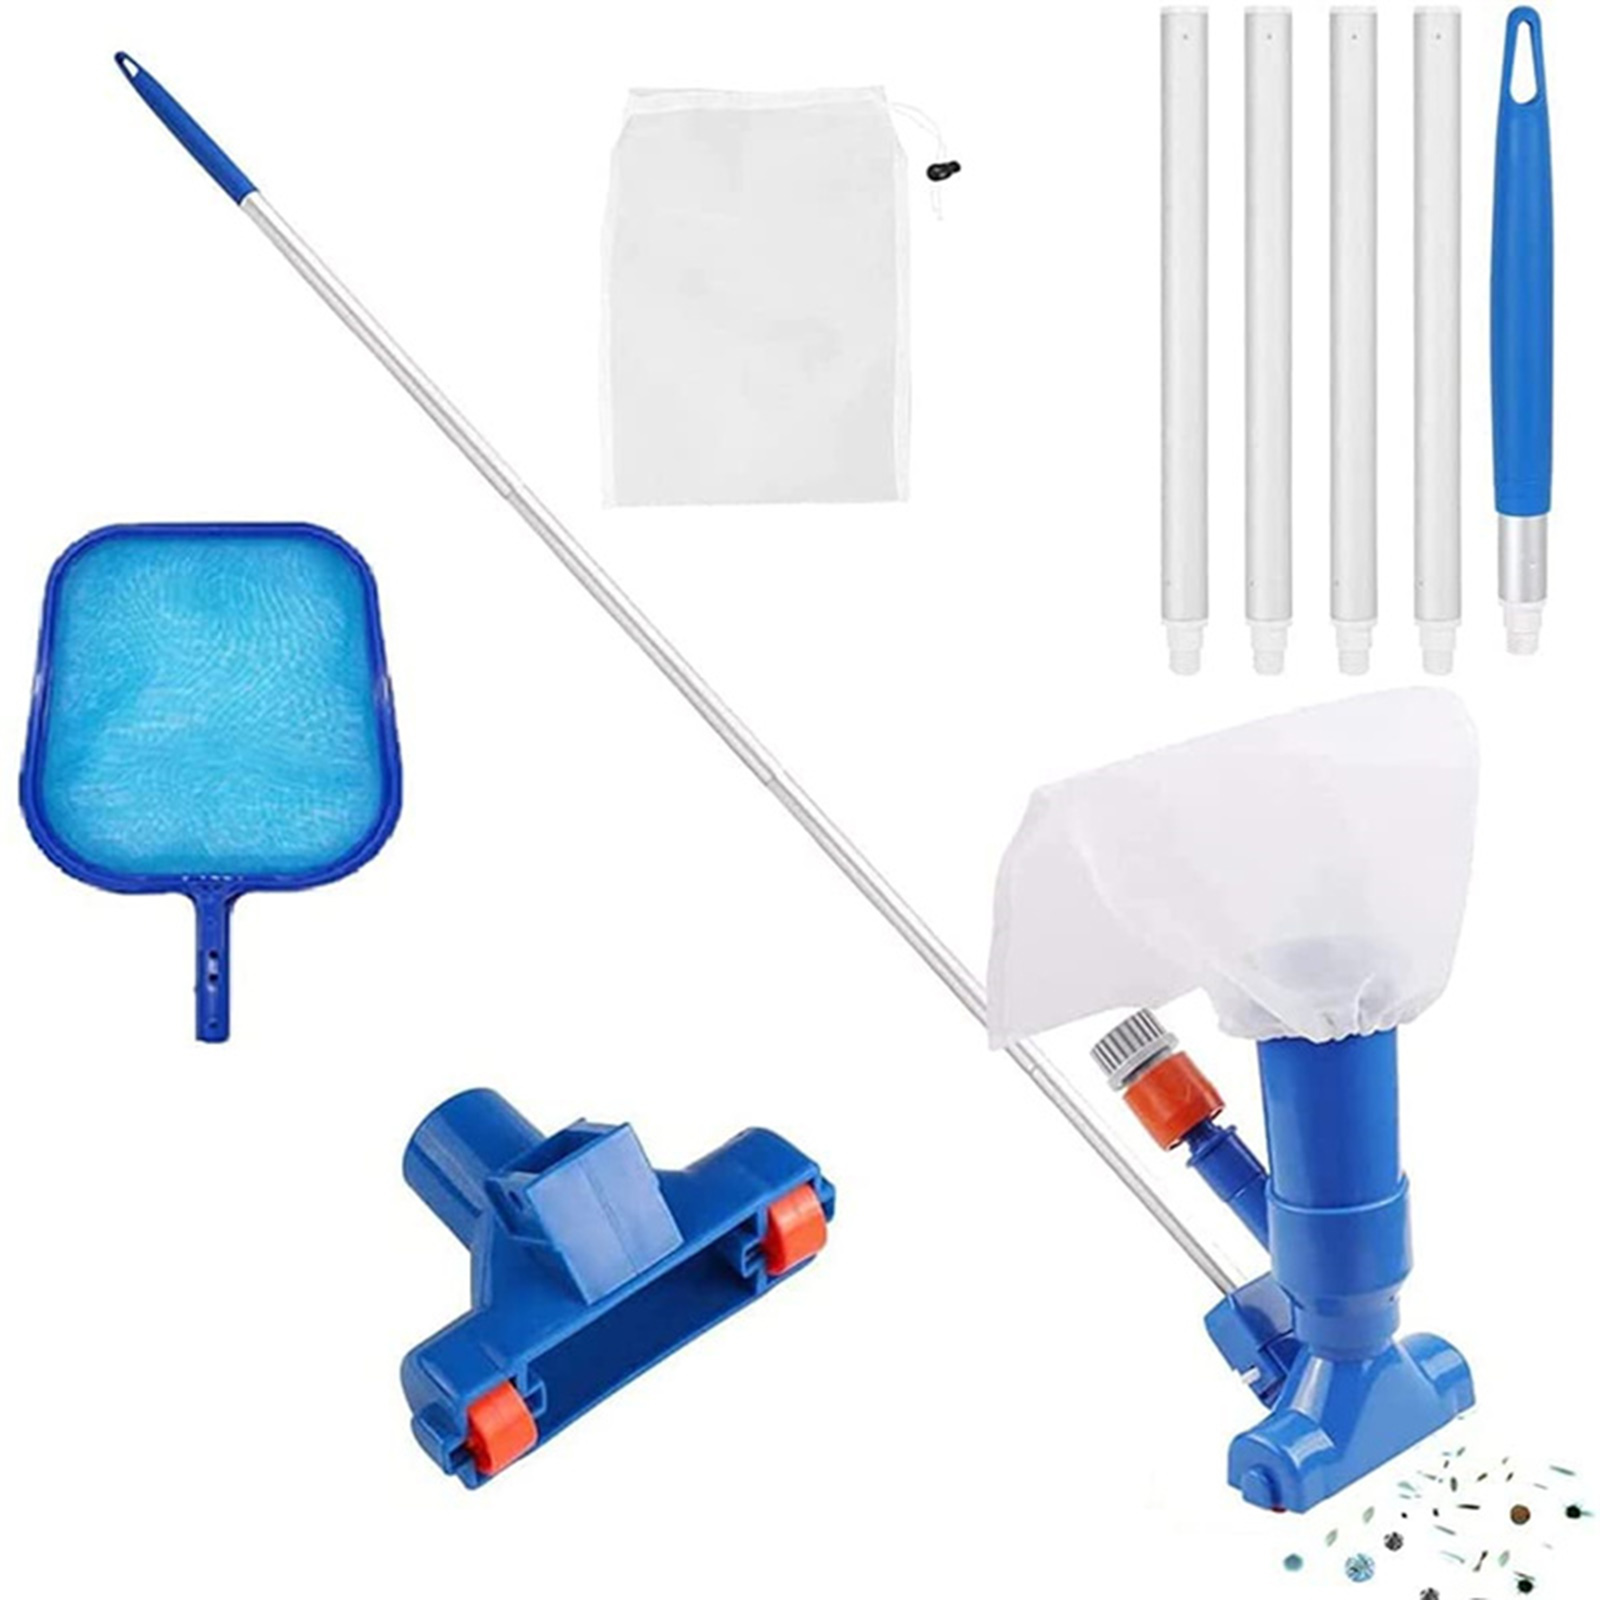 Portable Pool Vacuum Cleaner Kit with 5 Section Pole and Mesh Bags Pool Cleaning Accessories for Above Ground Pool, Size: Large